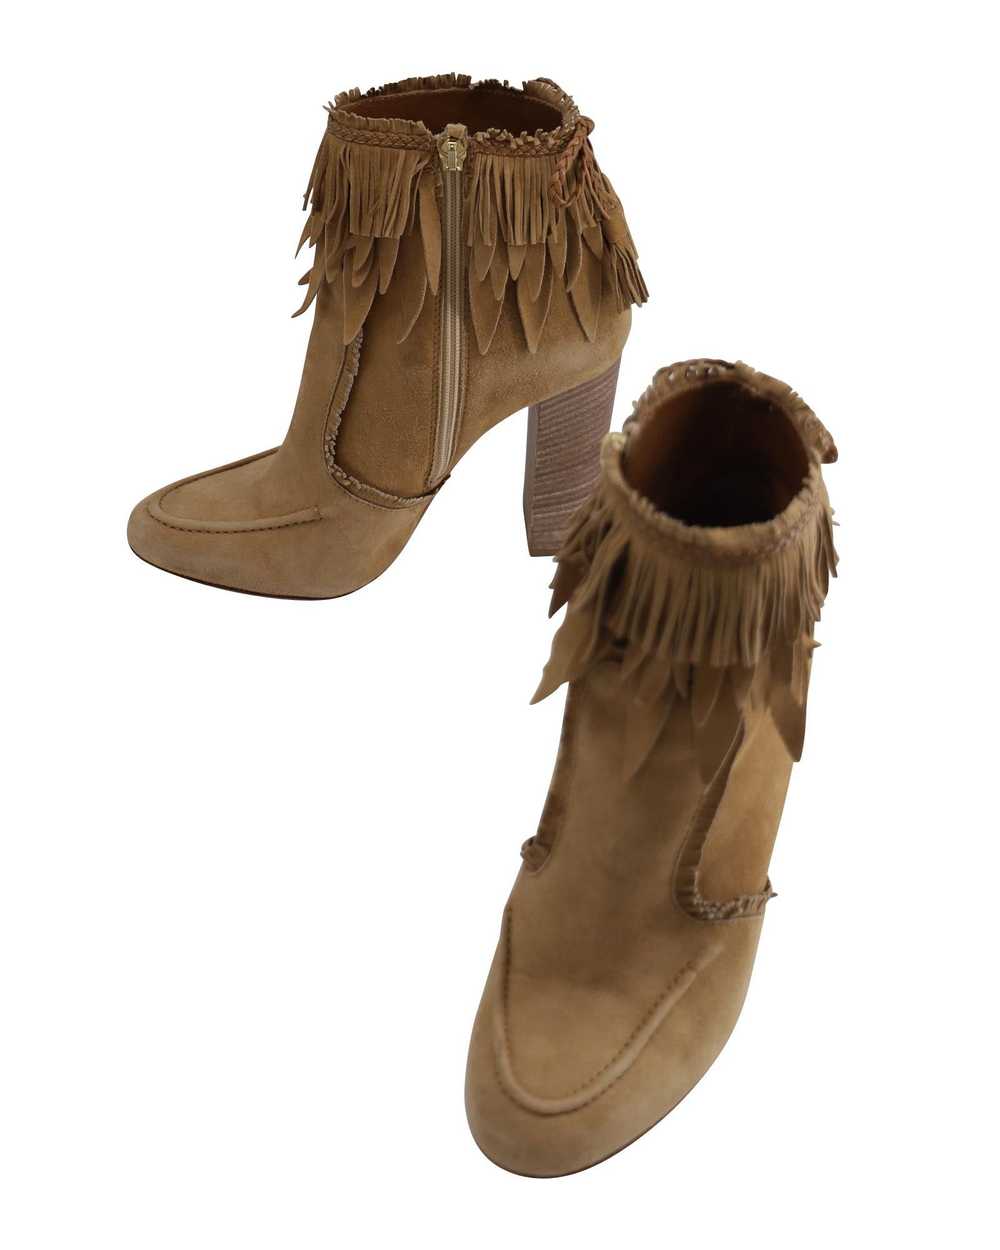 Aquazzura Fringed Beige Suede Ankle Boots with Bl… - image 9